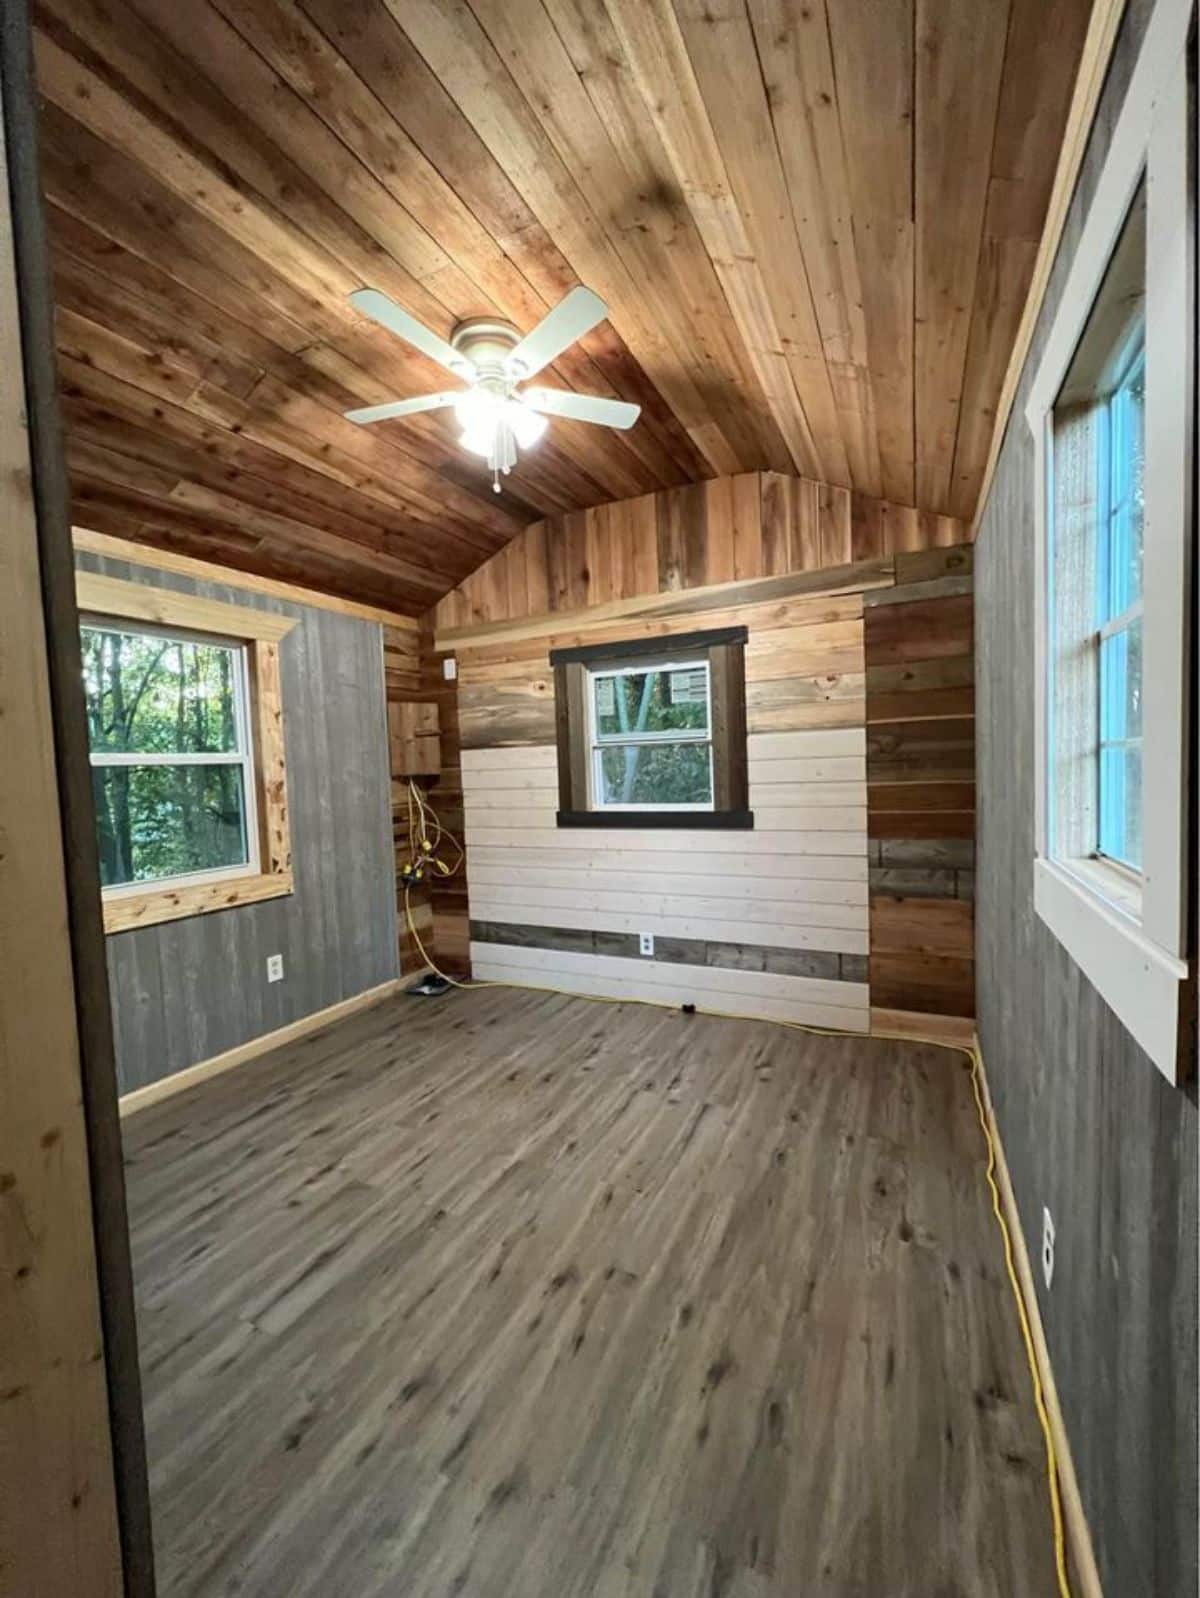 Main floor bedroom area of Affordable Tiny Home